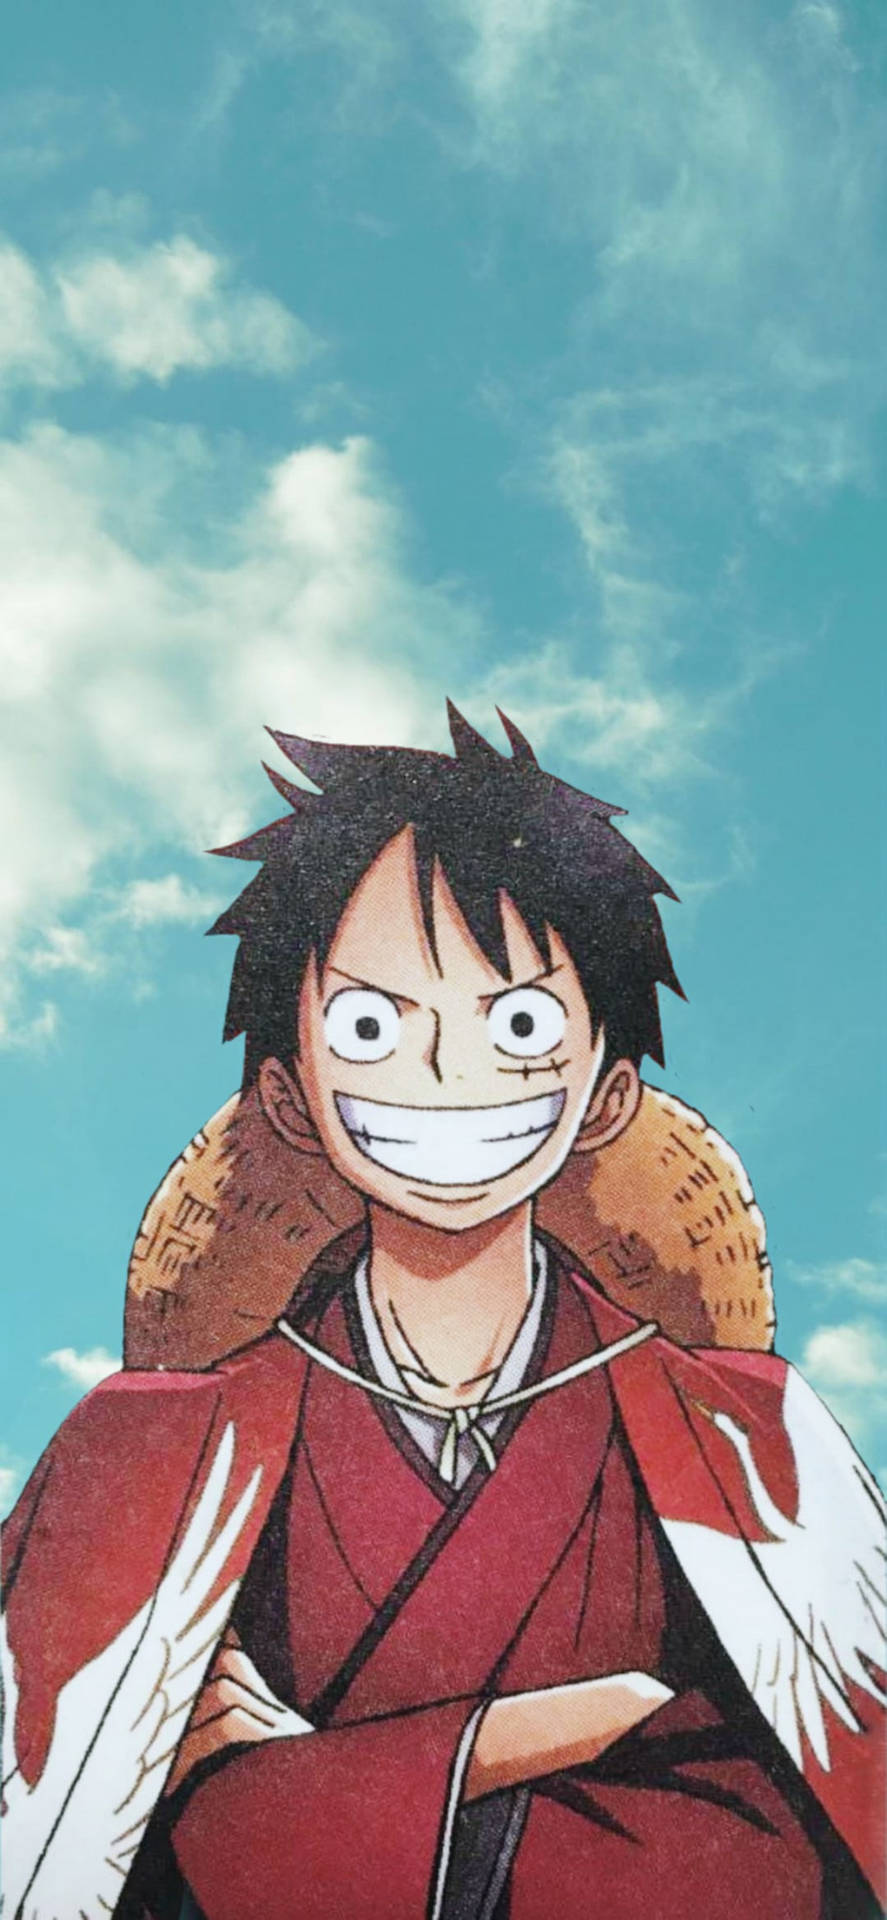 Luffy Aesthetic Under A Cloudy Sky Wallpaper